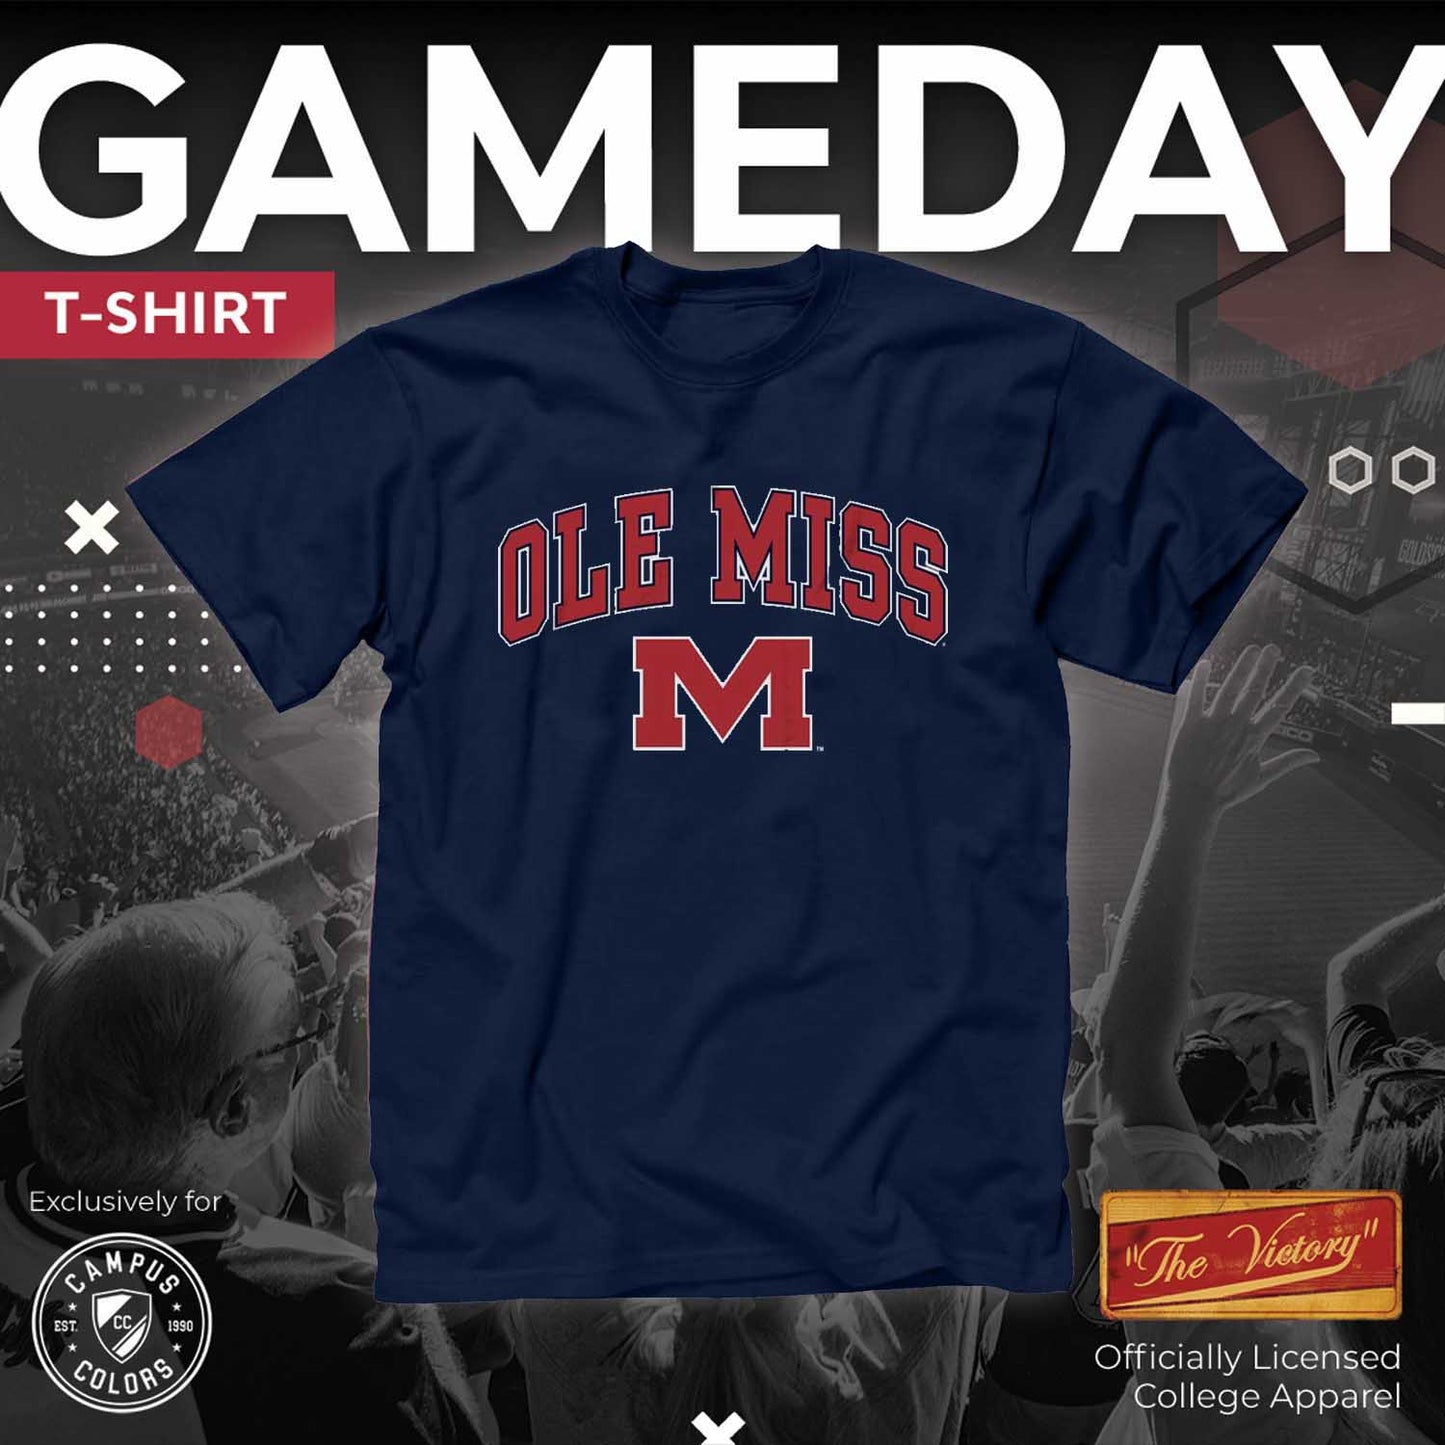 Ole Miss Rebels NCAA Adult Gameday Cotton T-Shirt - Navy